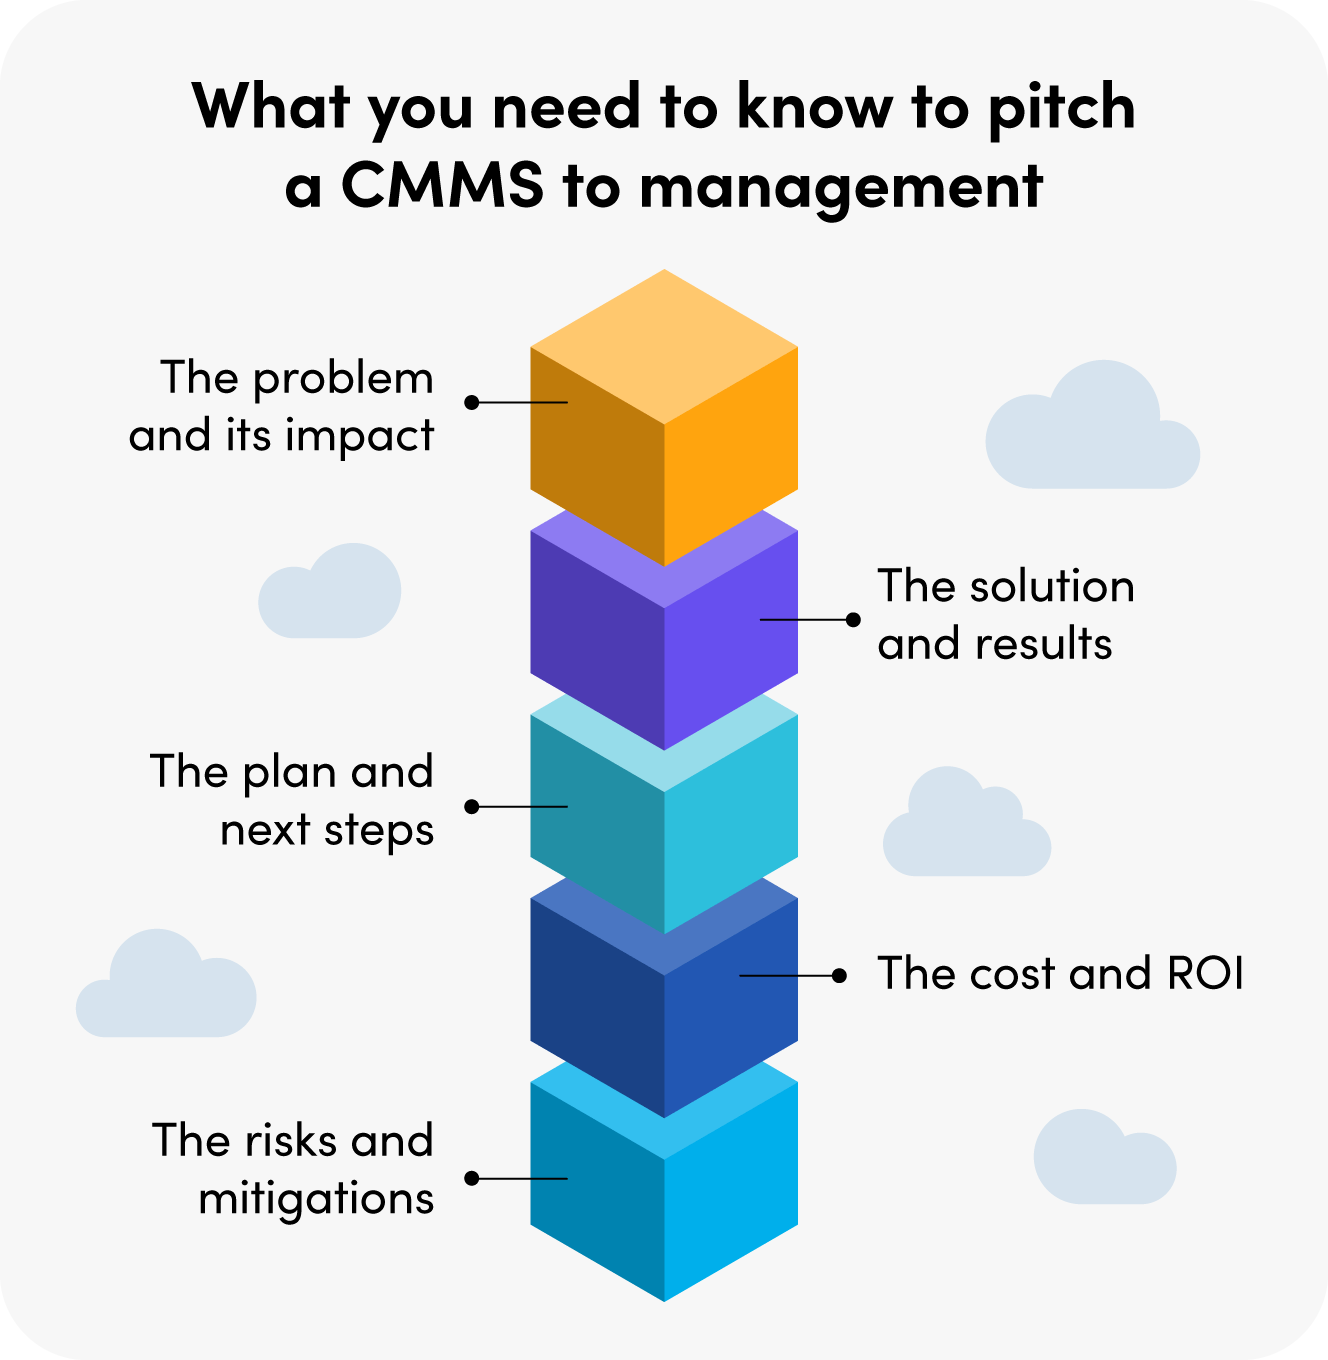 What you need to know to pitch a CMMS to management